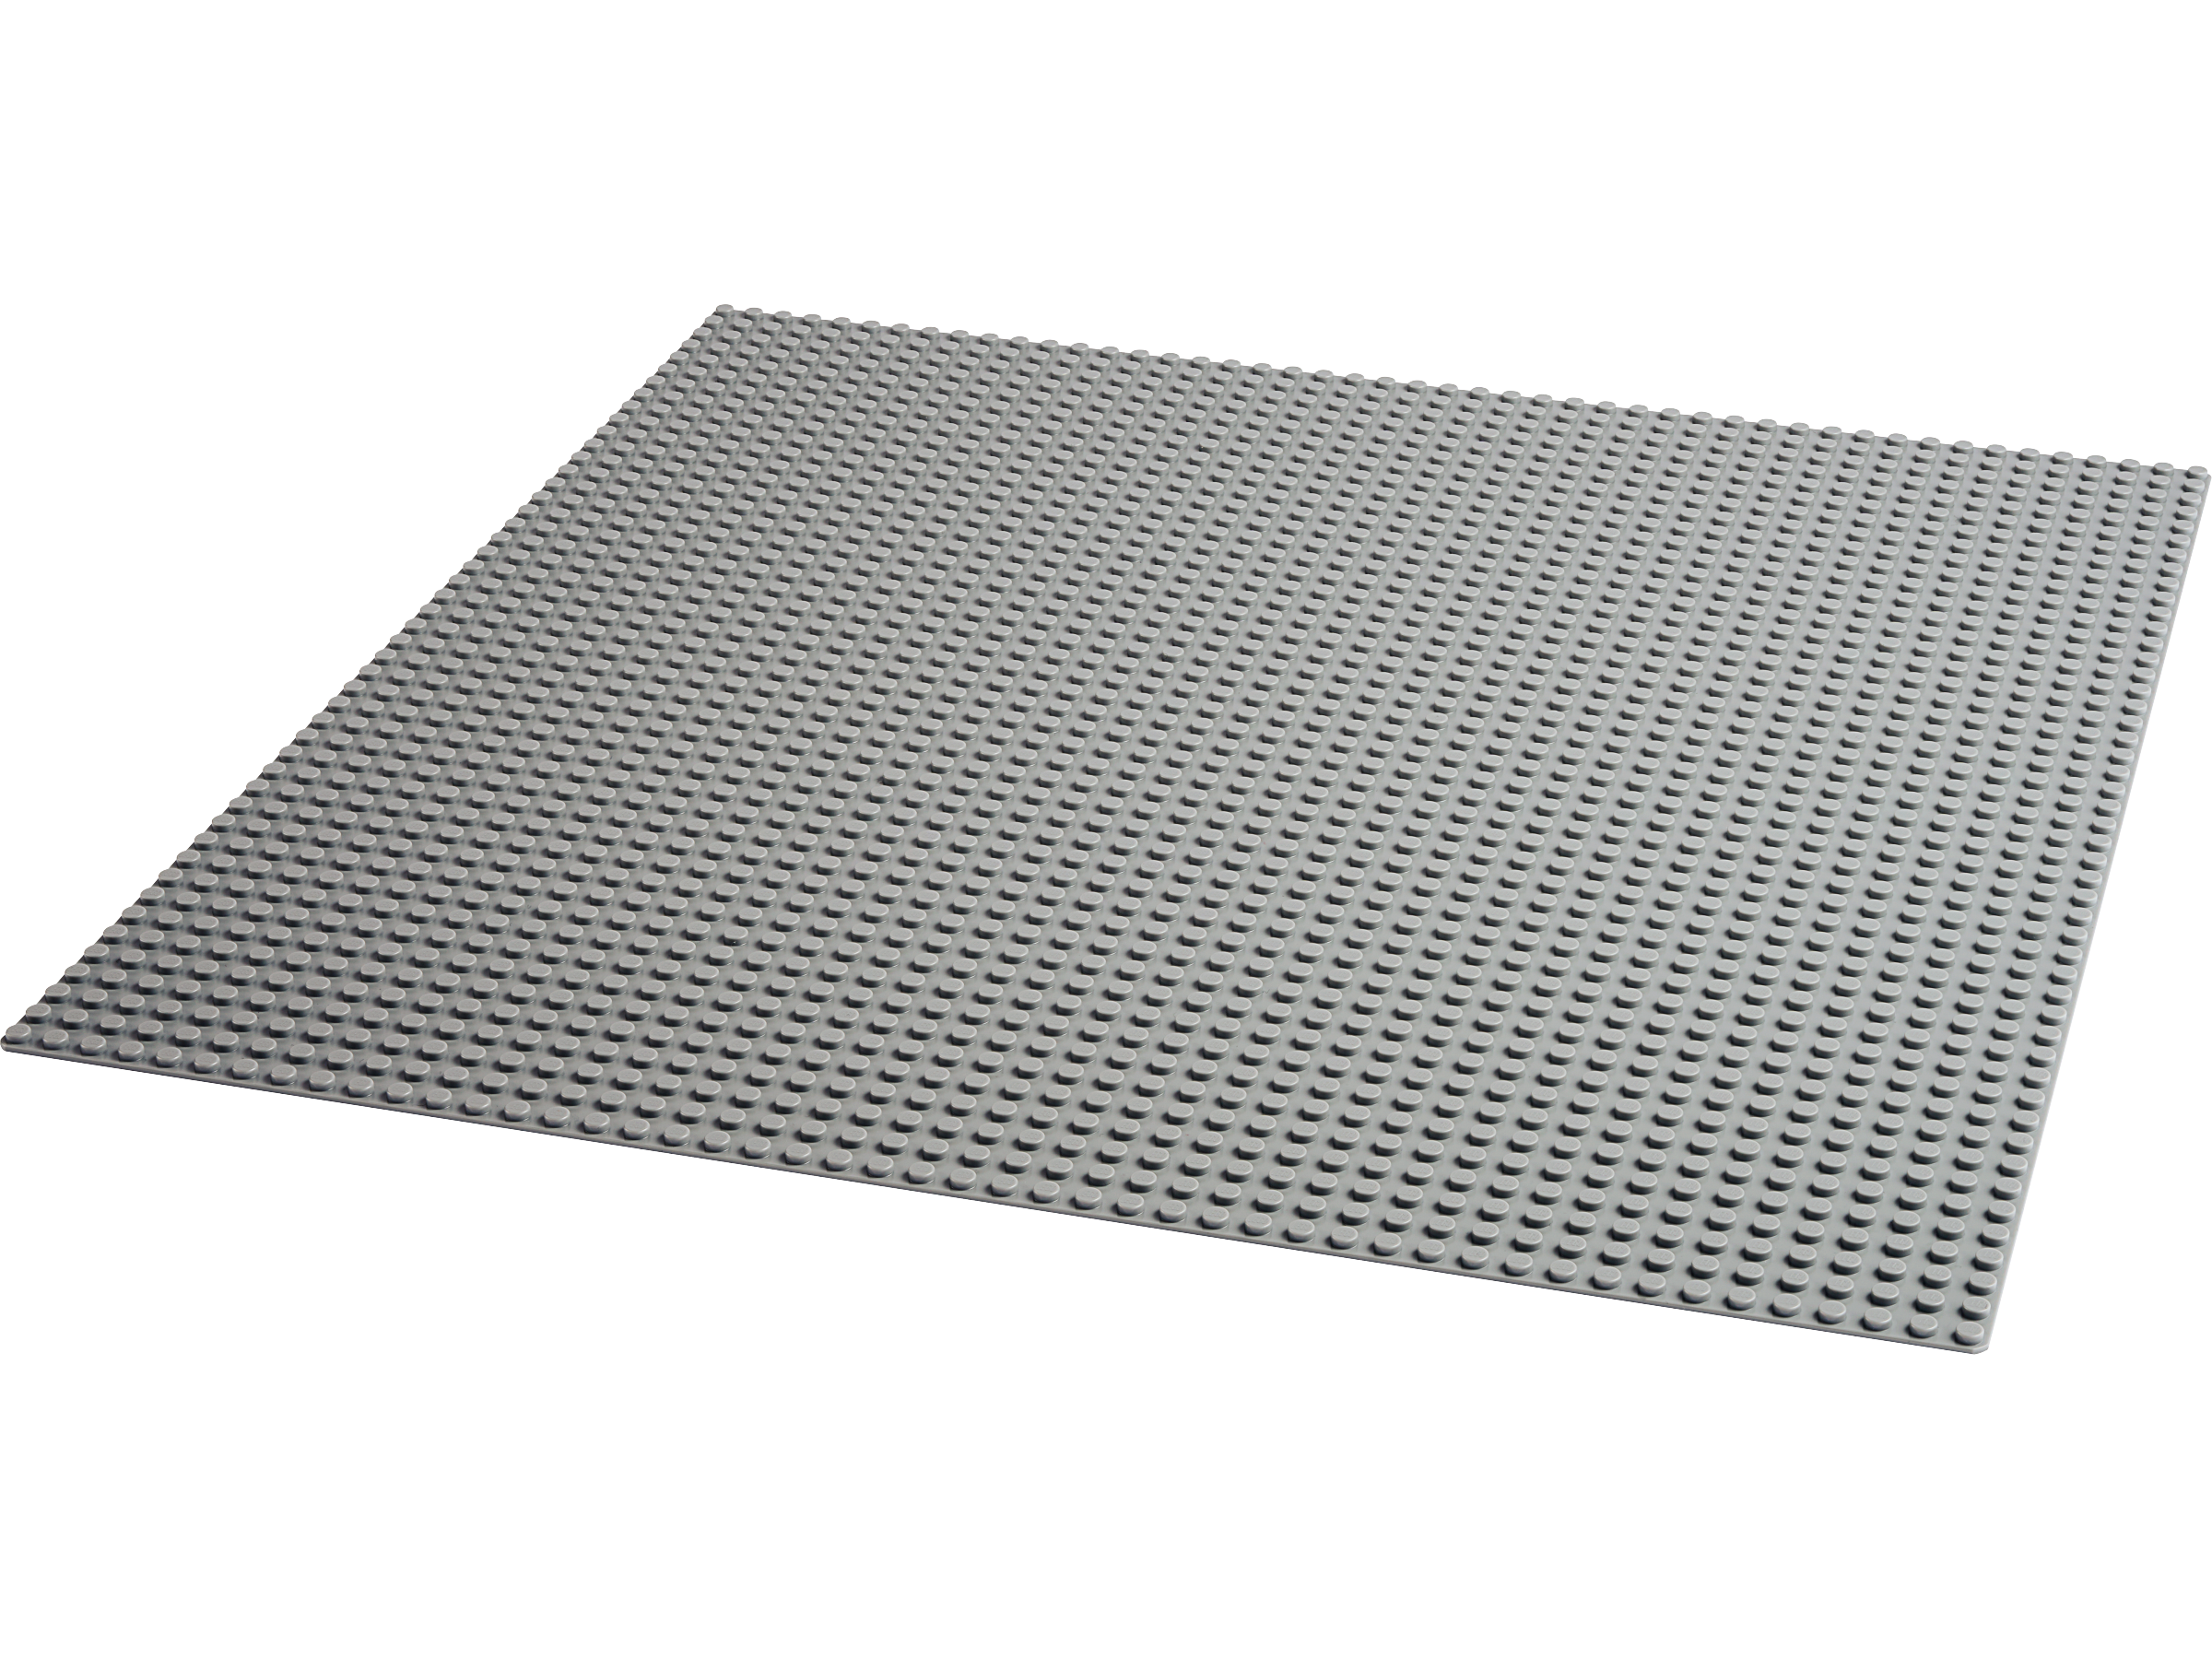 Gray Baseplate 11024 | Classic | Buy online at the Official LEGO® Shop US